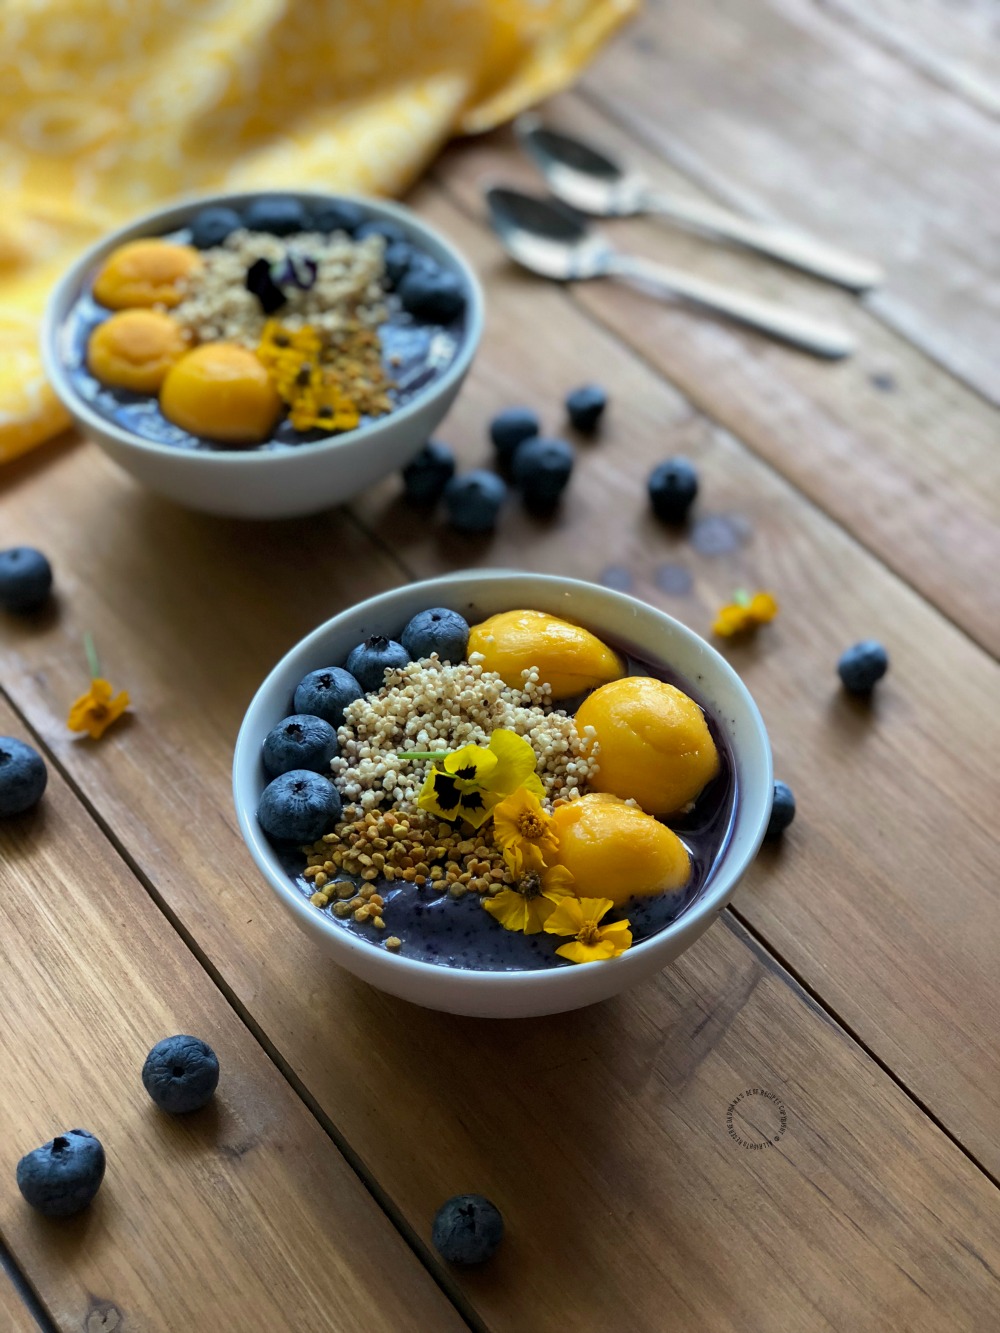 Sensible blueberry power smoothie bowl garnished with edible flowers, amaranth and bee pollen